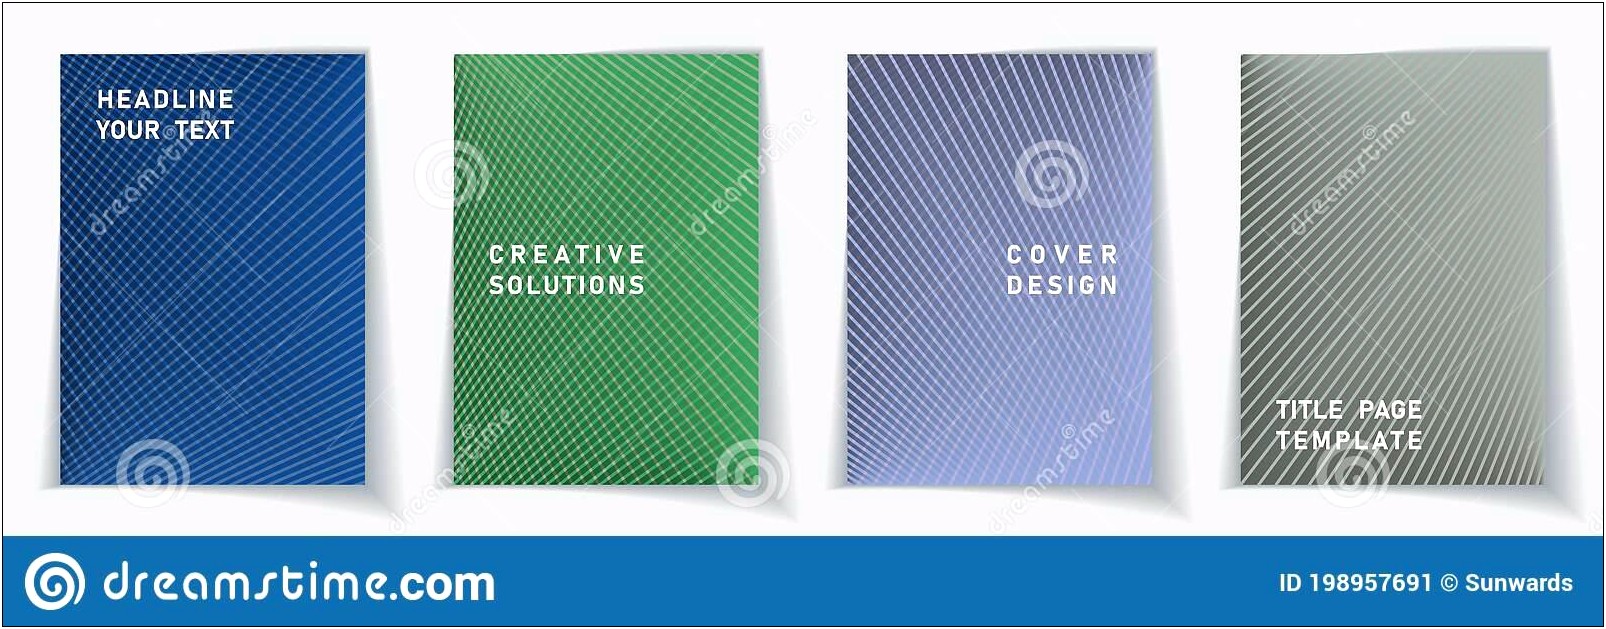 Creative Cover Page Templates Free Download